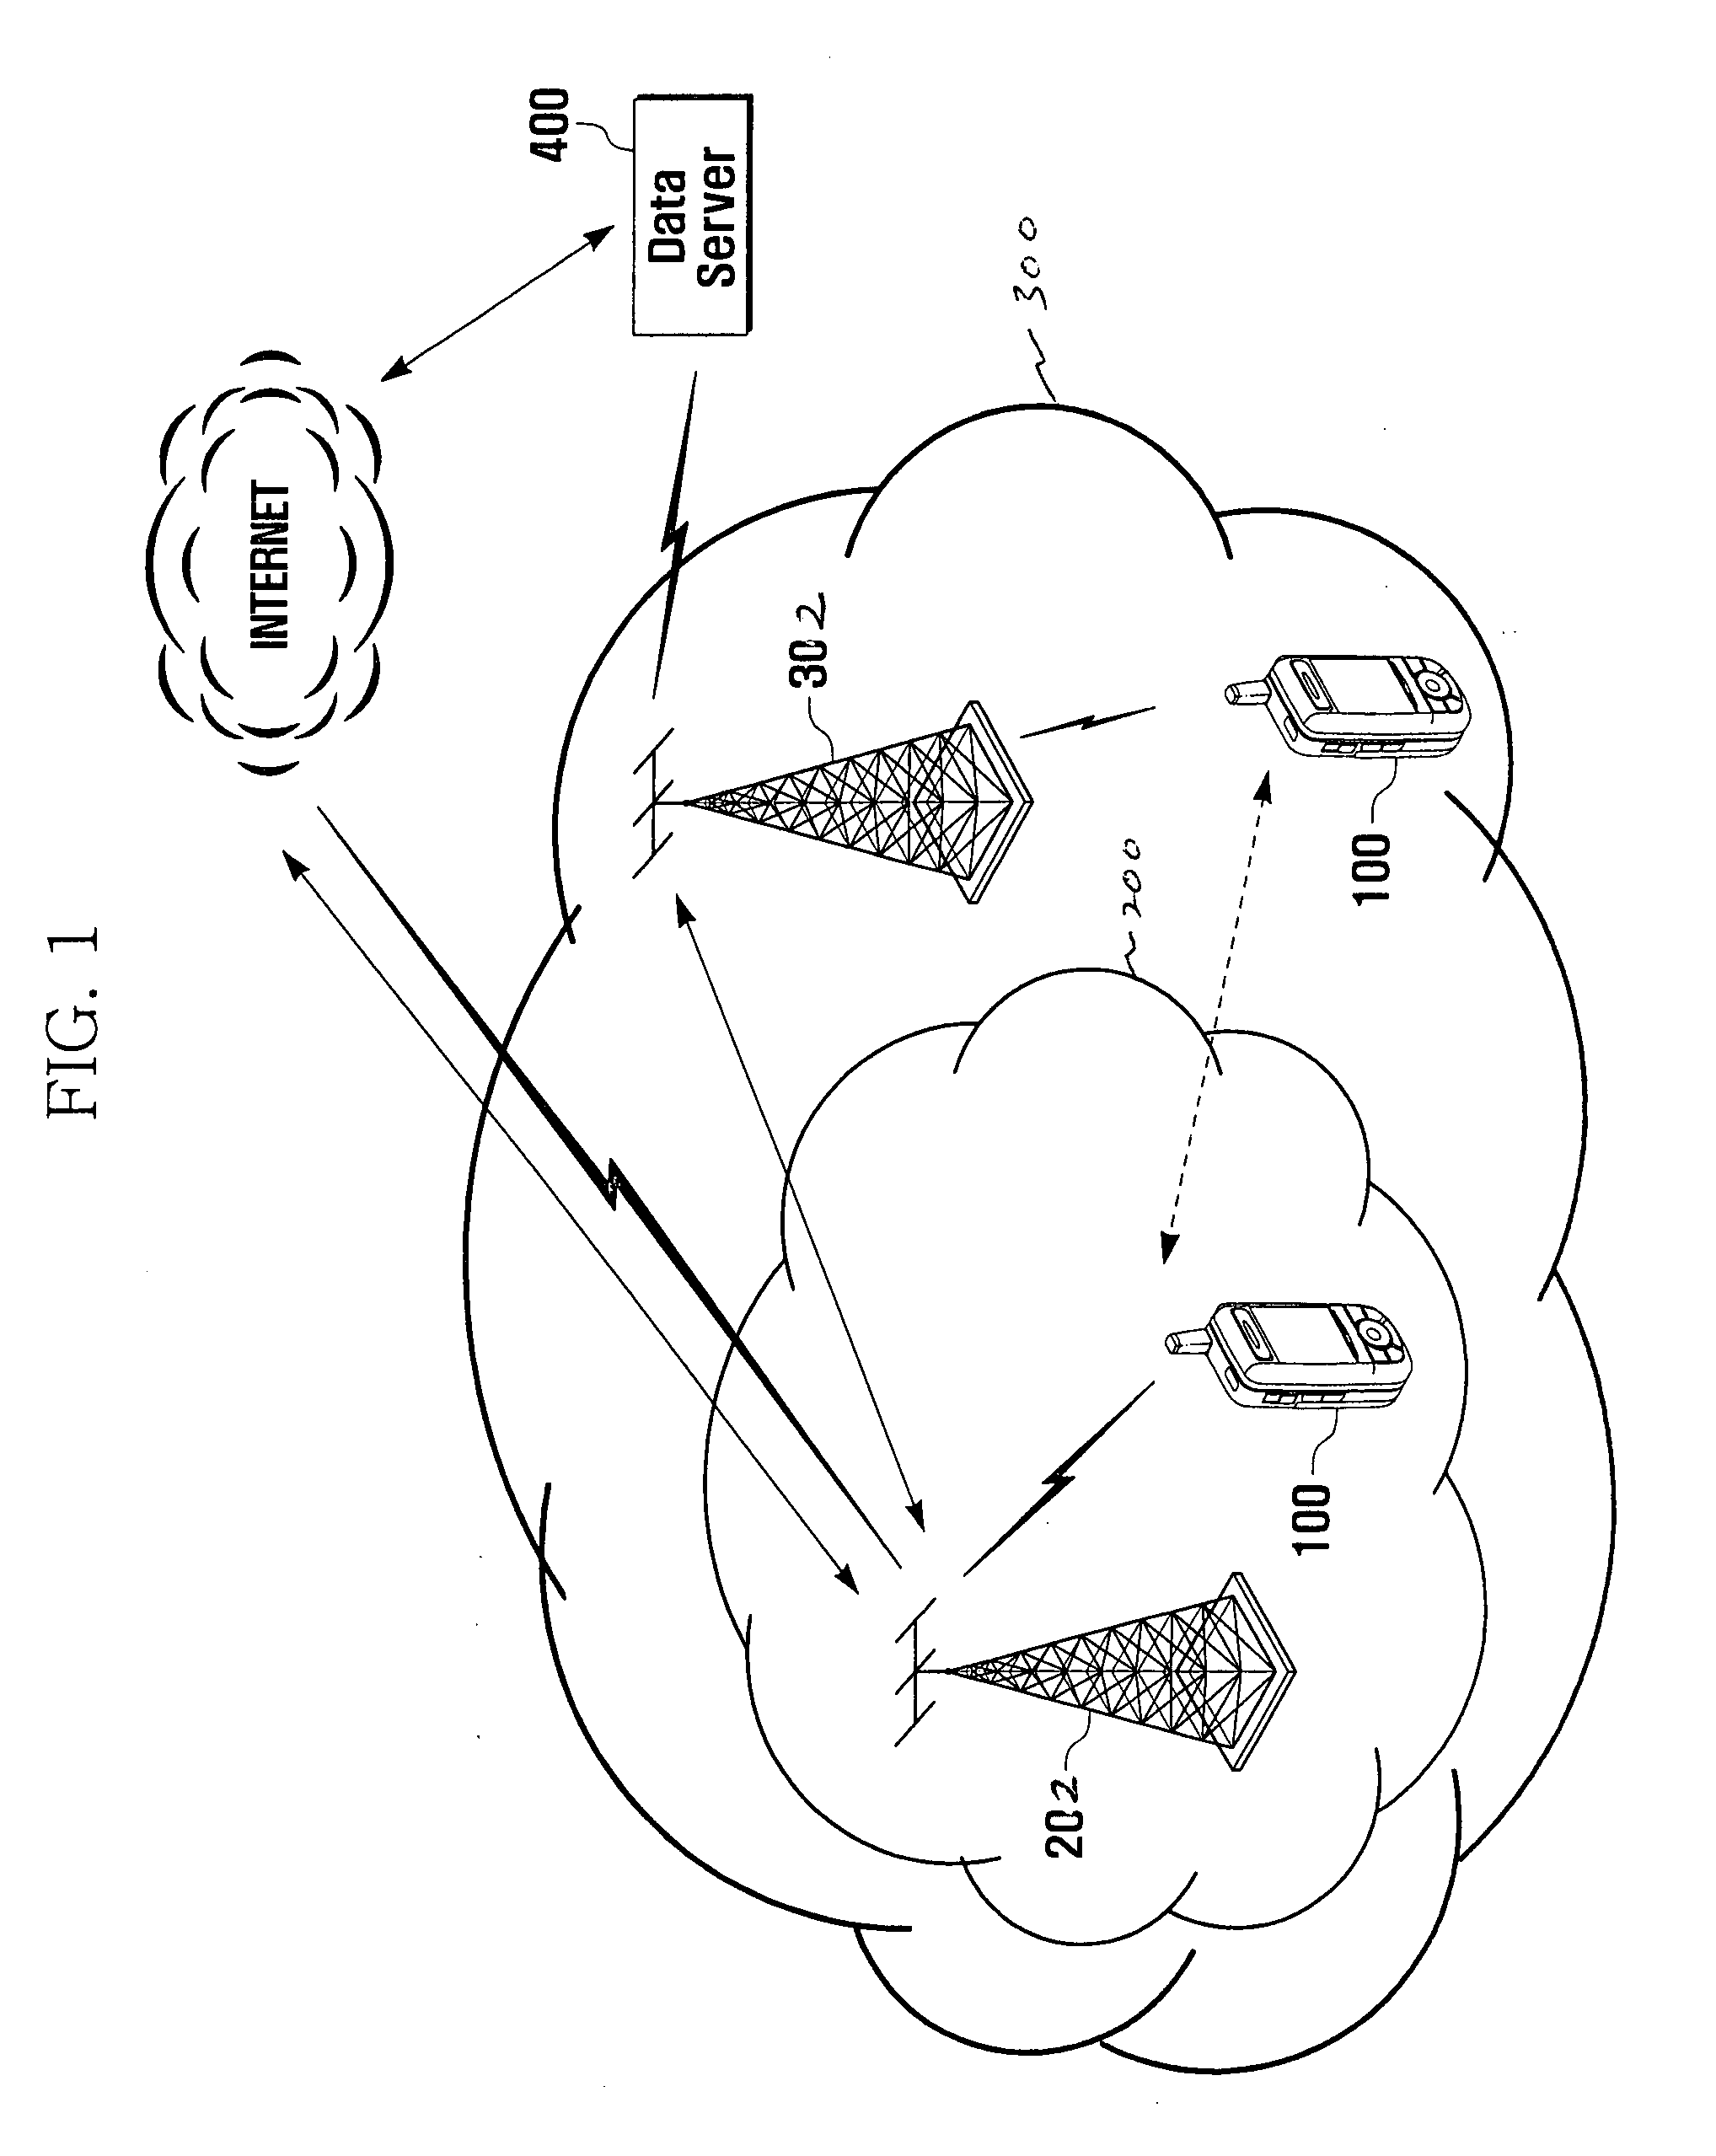 Network-adaptive function control method for dual-mode mobile terminal